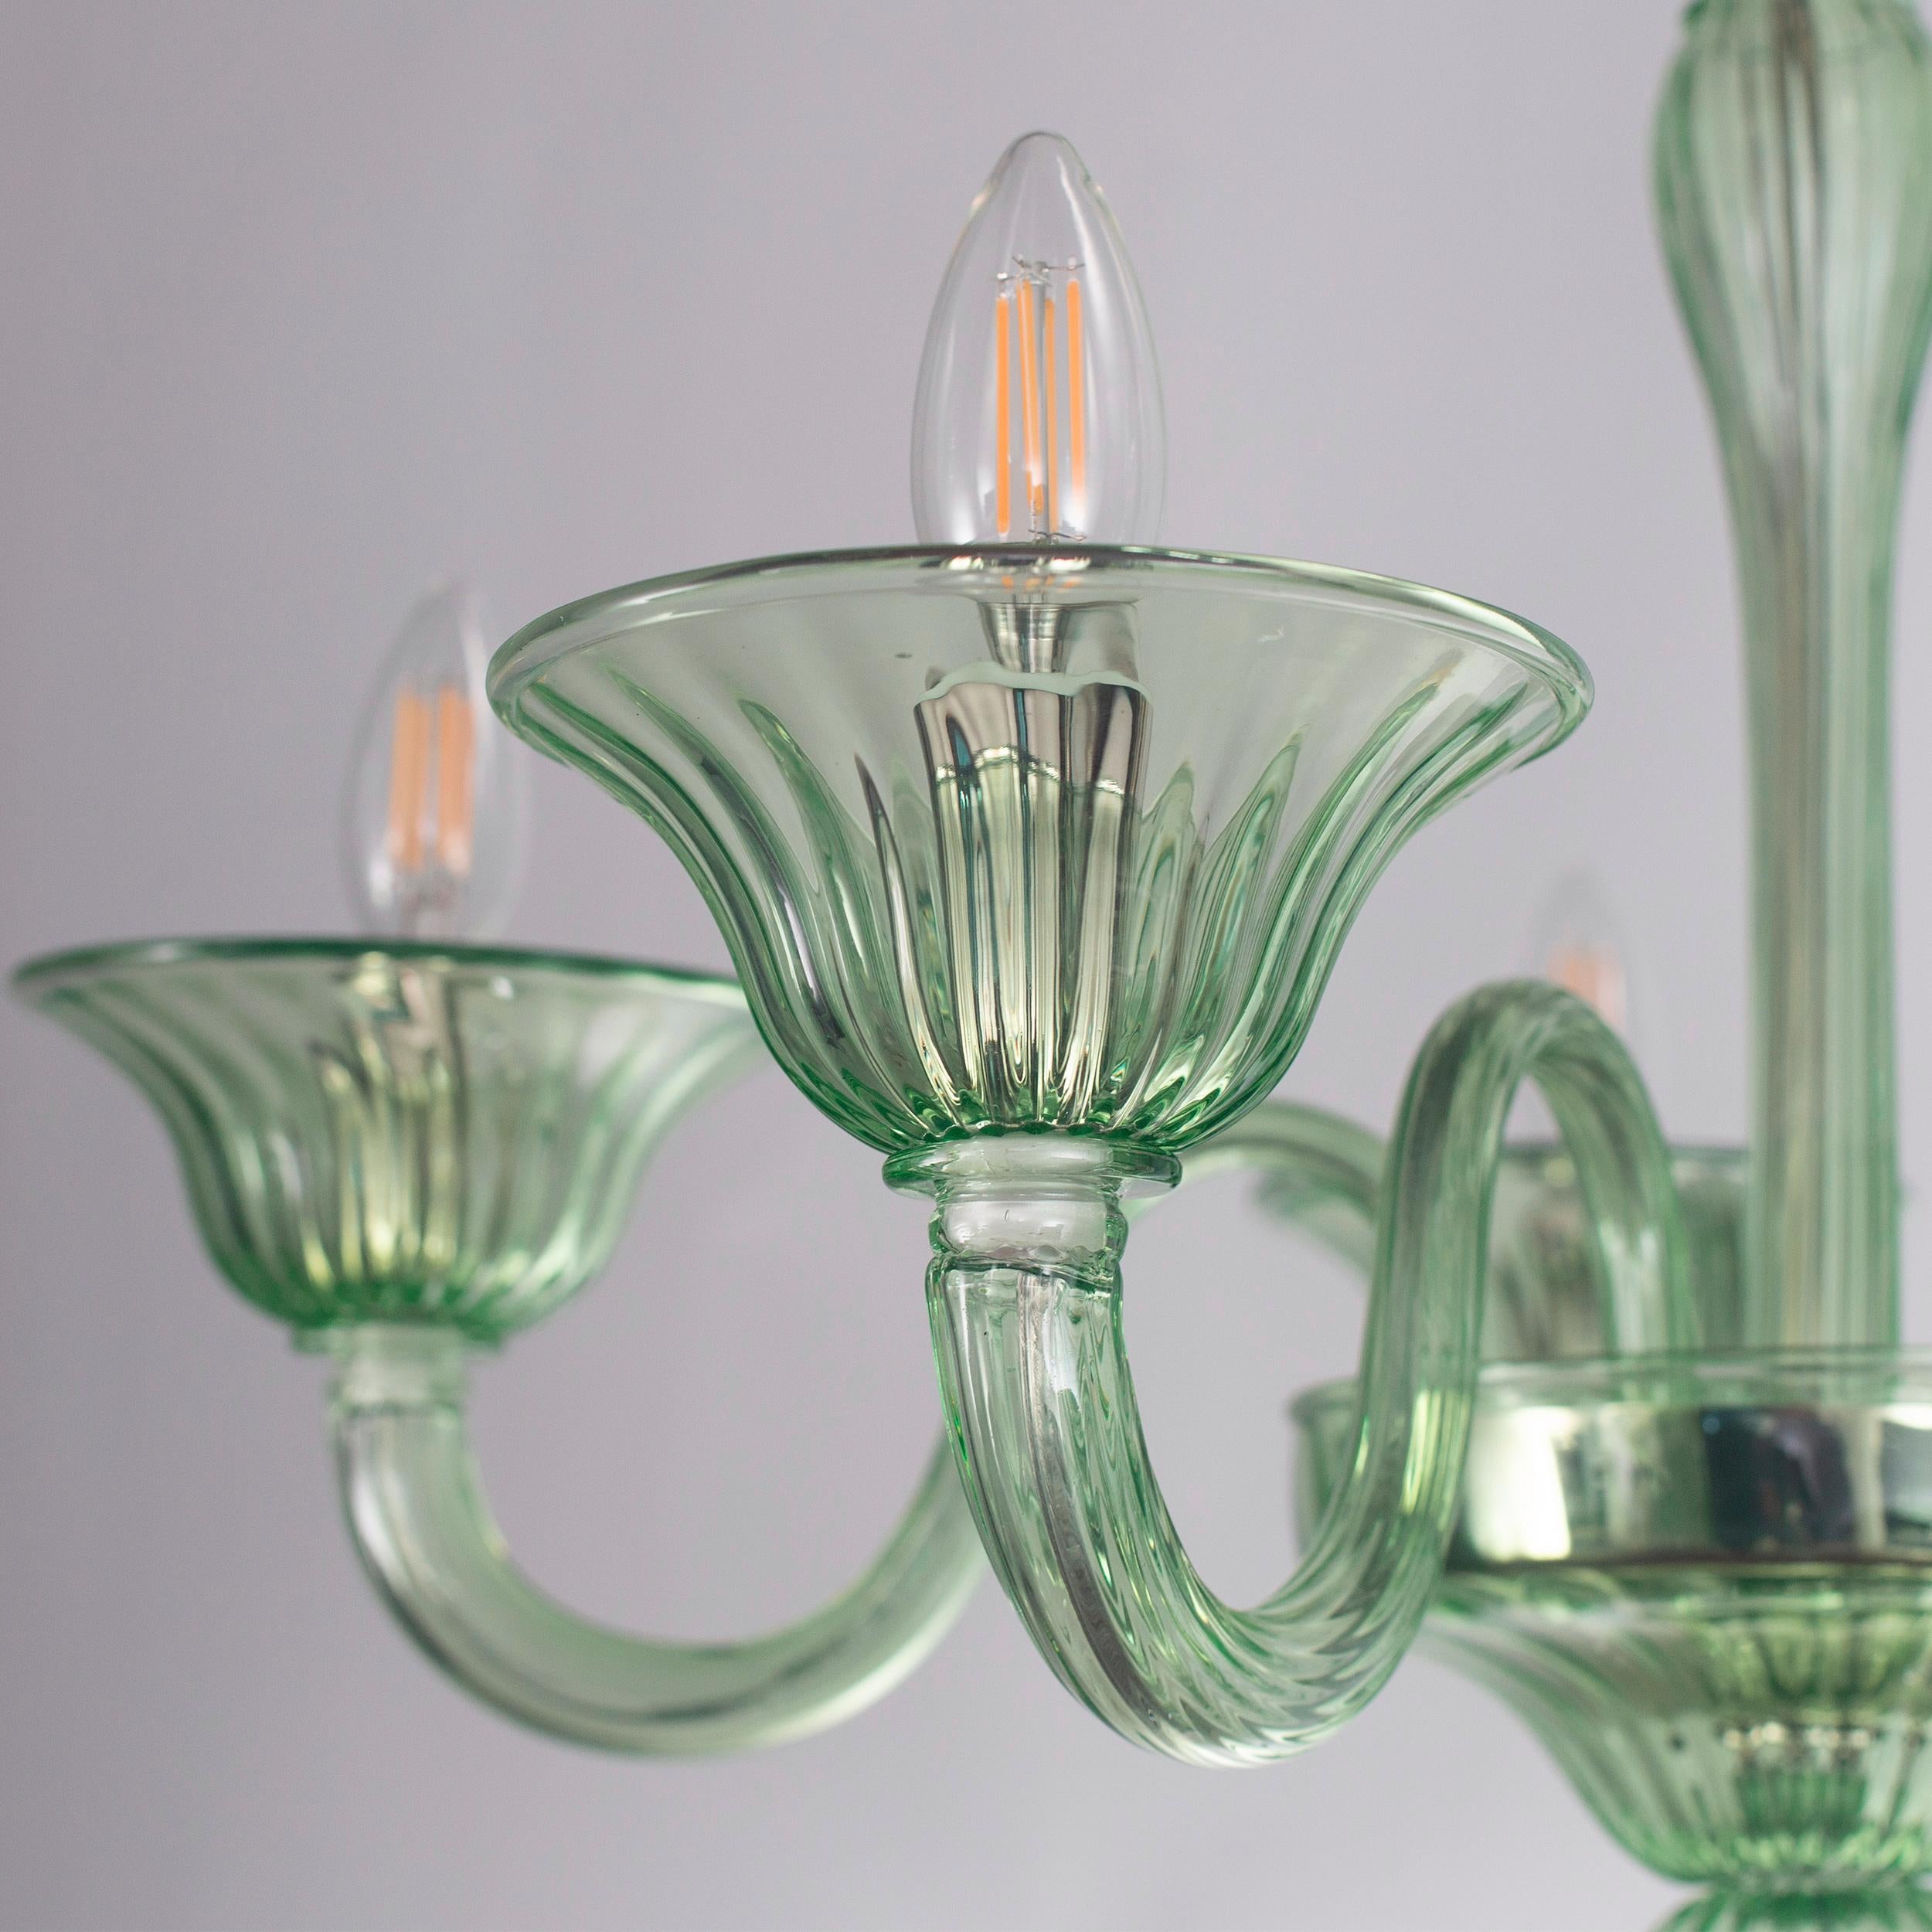 Classic Chandelier, 5 Arms Green Murano Glass Simplicissimus by Multiforme In New Condition For Sale In Trebaseleghe, IT